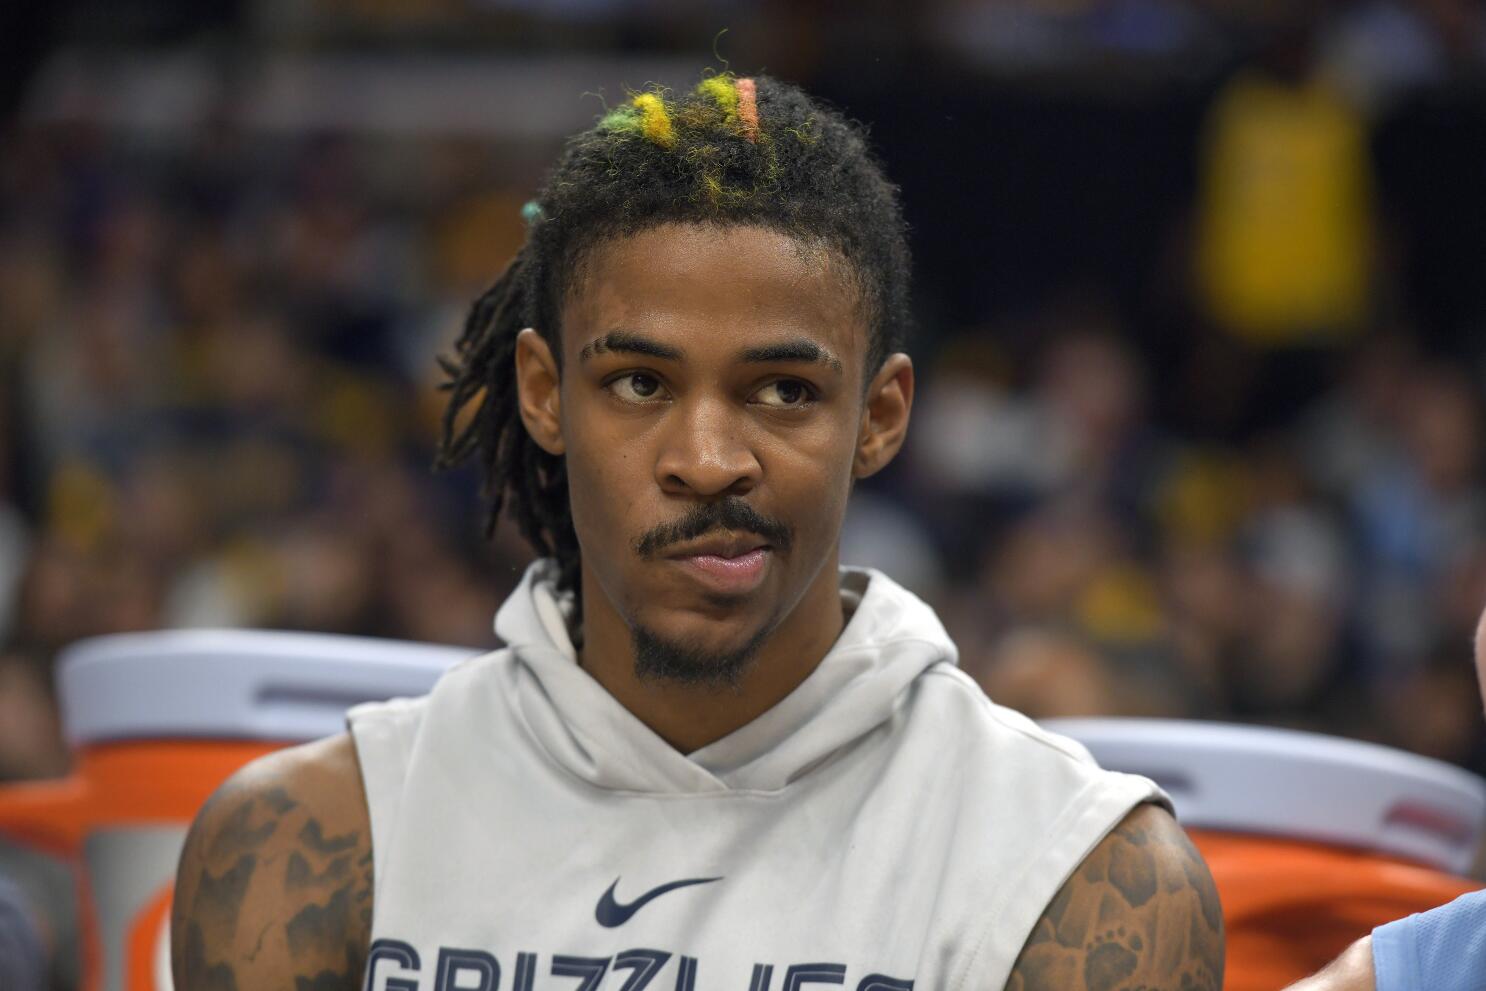 Nike releases statement of support for Ja Morant after latest NBA suspension